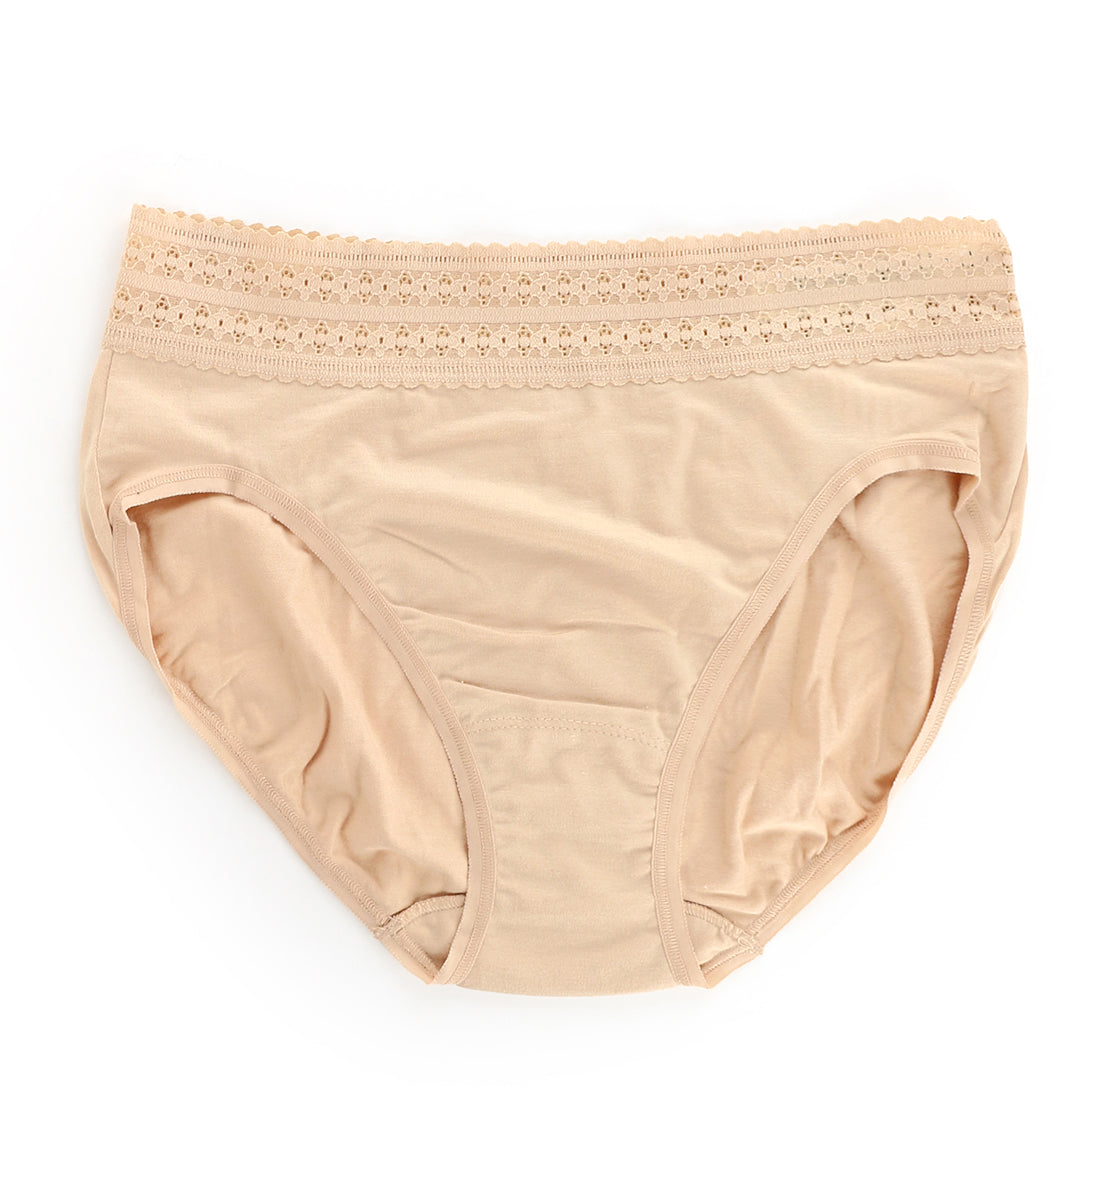 Hanky Panky DreamEase French Brief (632464),Small,Chai - Chai,Small